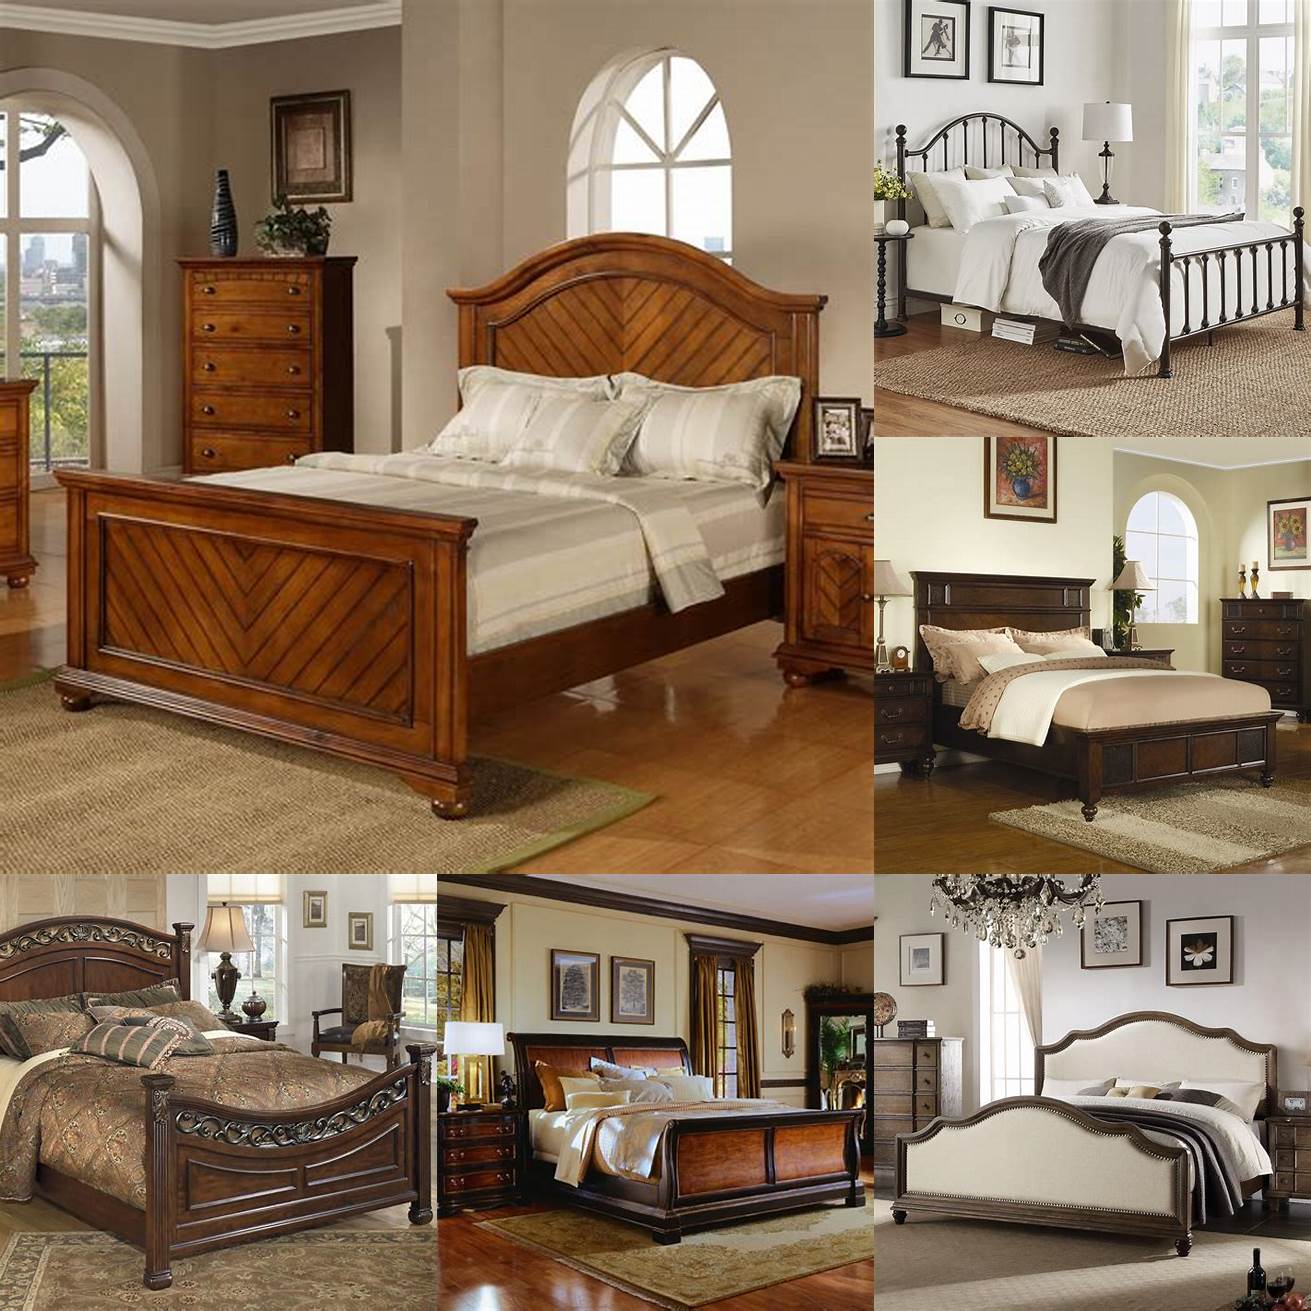 A bed frame in a classic style